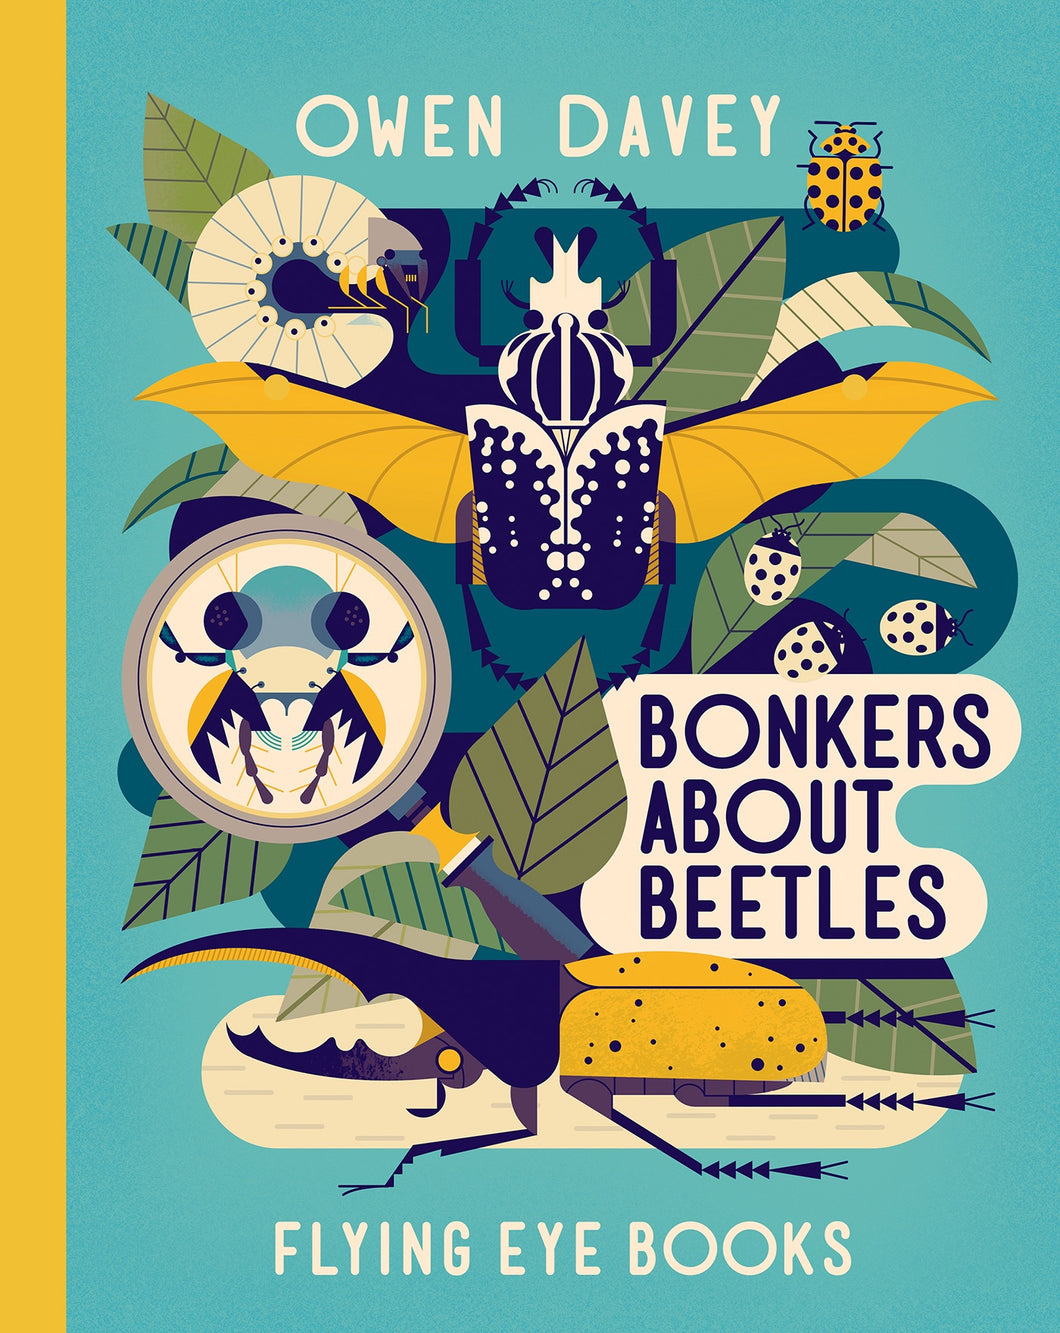 Bonkers About Beetles - Things They Love